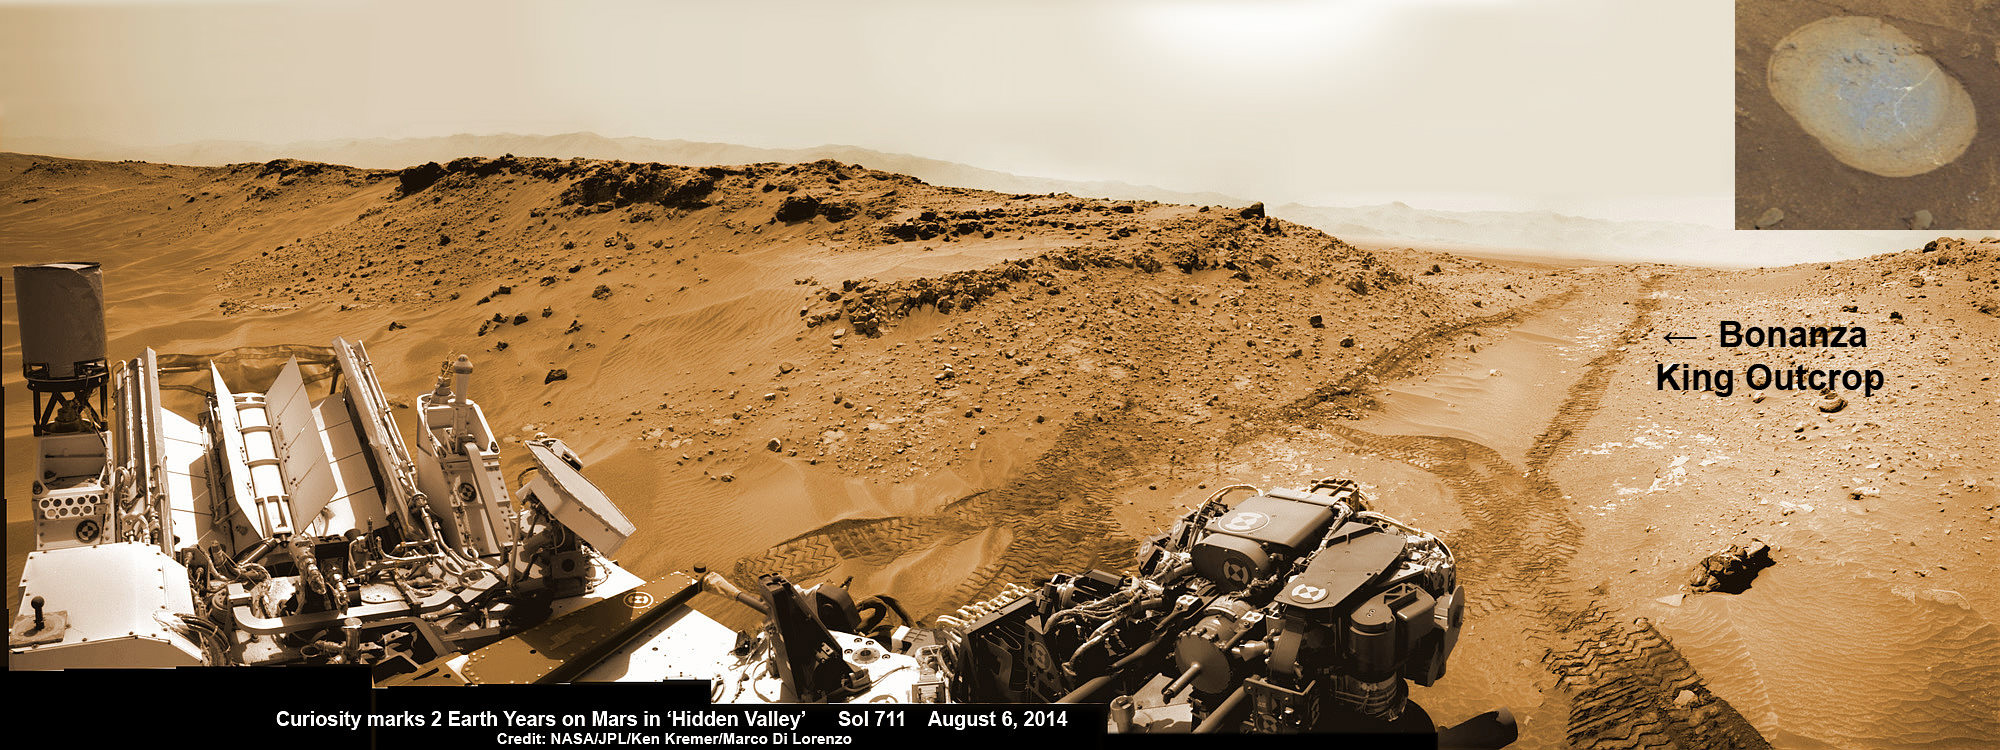 NASA’s Curiosity rover looks back to ramp with potential 4th drill site target at ‘Bonanza King’ rock outcrop in ‘Hidden Valley’ in this photo mosaic view captured on Aug. 6, 2014, Sol 711.  Inset shows results of brushing on Aug. 17, Sol 722, that revealed gray patch beneath red dust.  Note the rover’s partial selfie, valley walls, deep wheel tracks in the sand dunes and distant rim of Gale crater beyond the ramp. Navcam camera raw images stitched and colorized.  Credit: NASA/JPL-Caltech/Ken Kremer-kenkremer.com/Marco Di Lorenzo